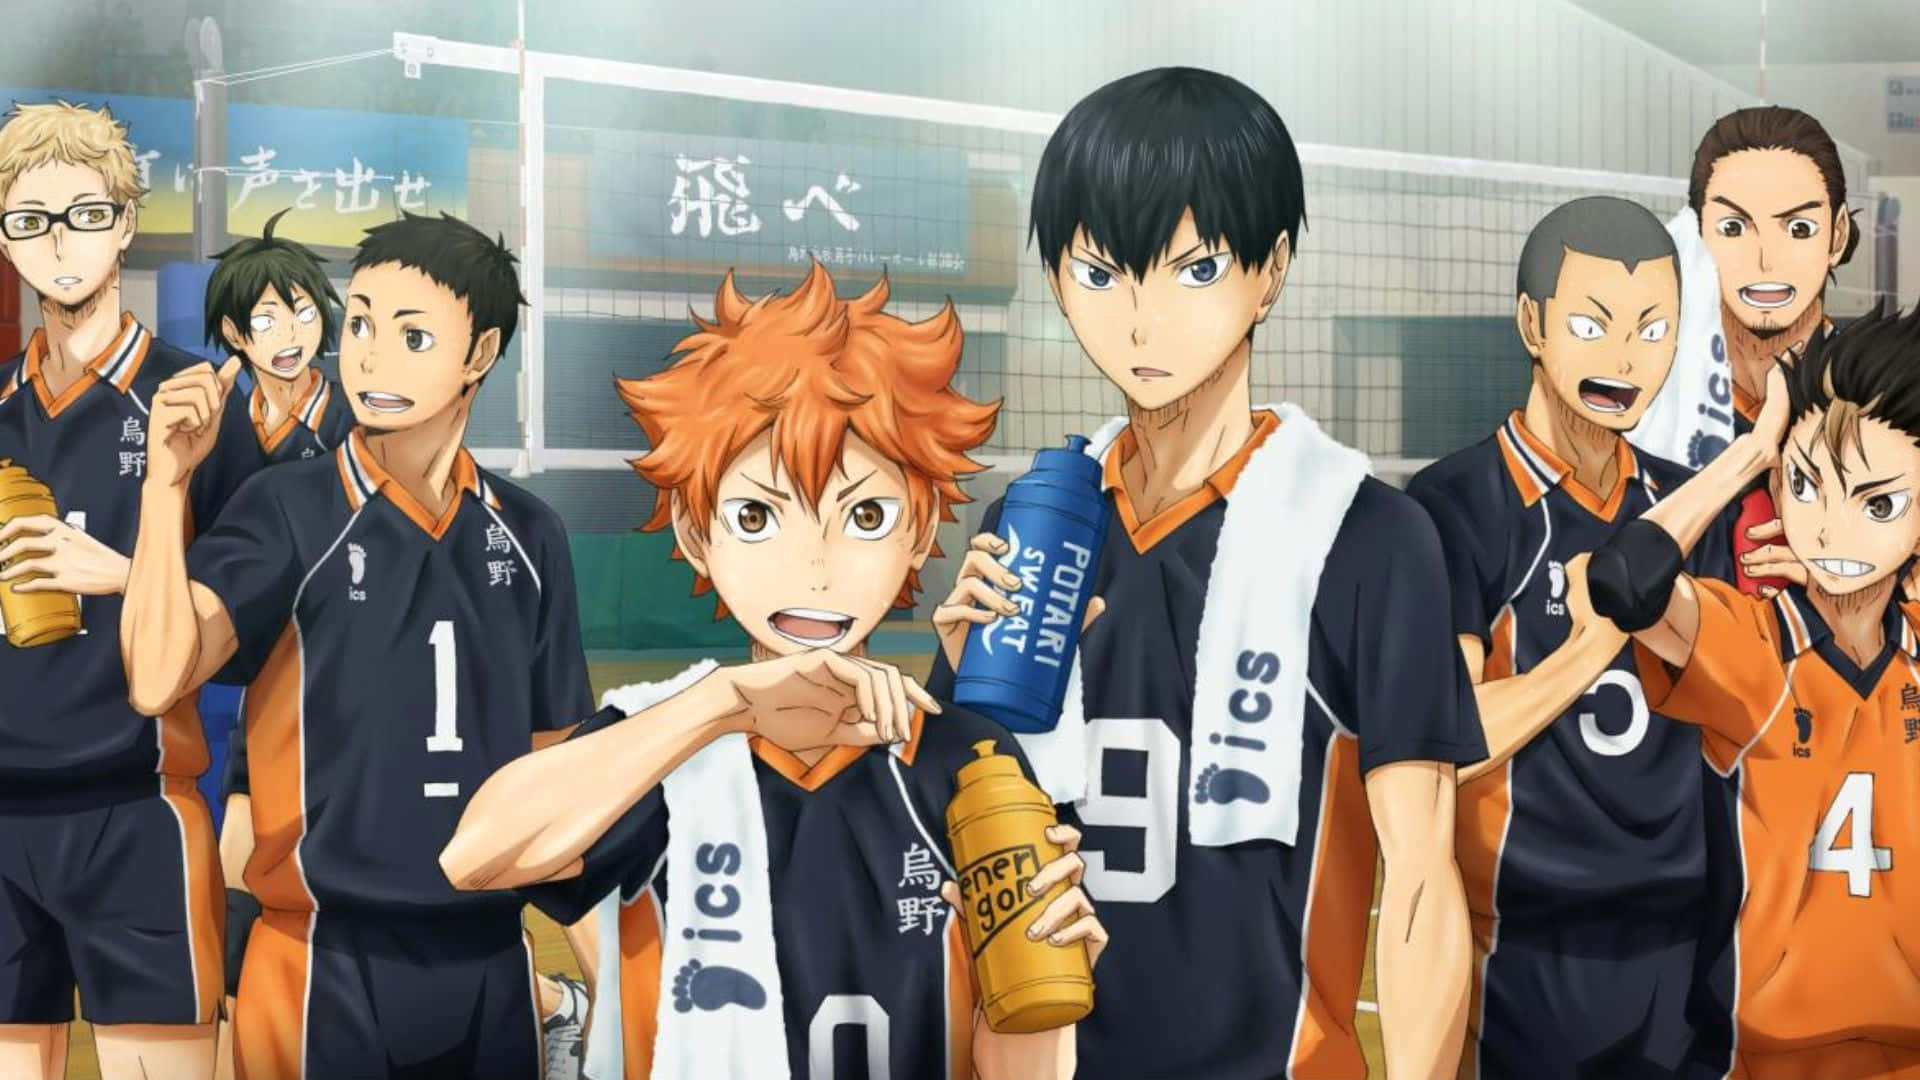 Rise up with the power of Haikyuu